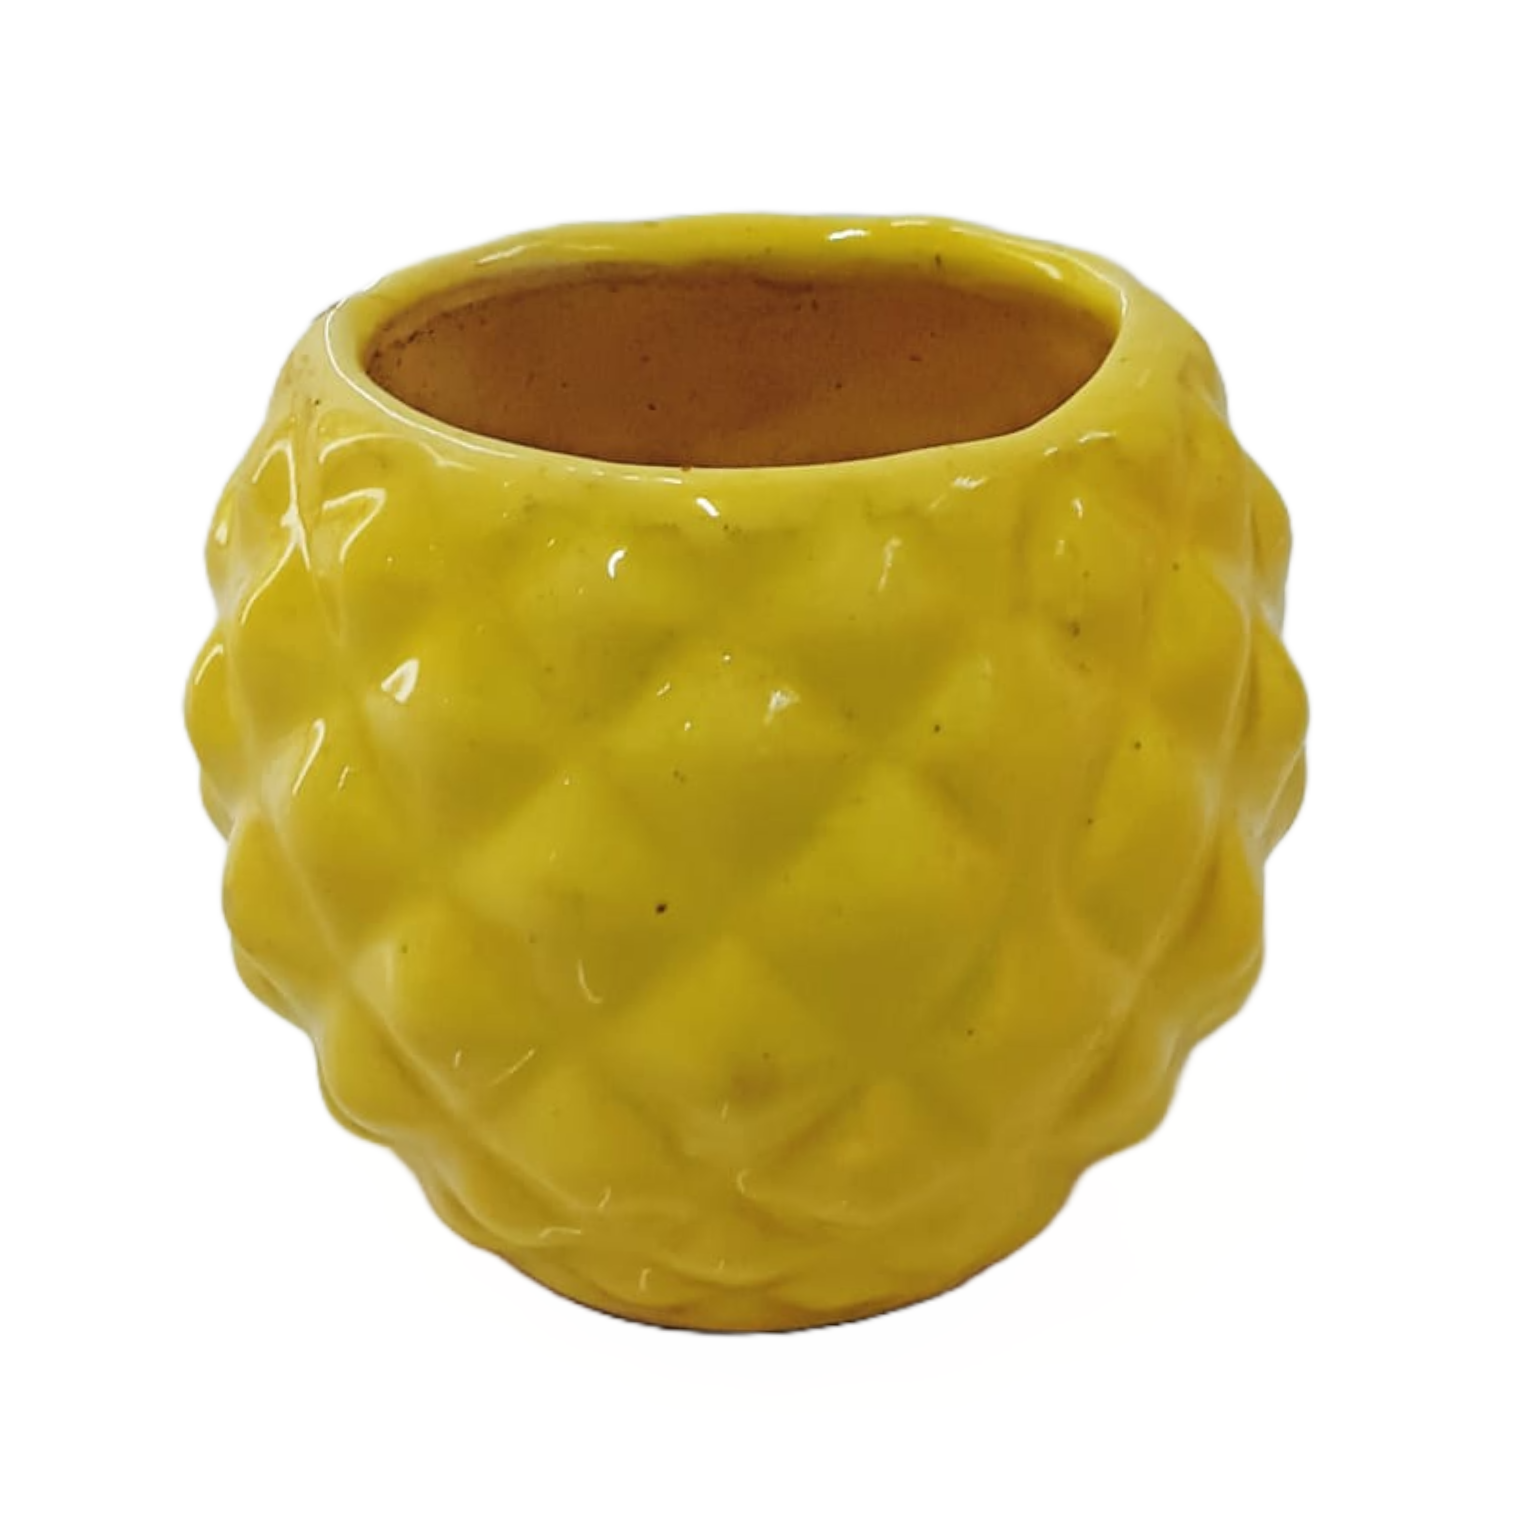 Buy Diamond Ceramic Pots Online - Contemporary Planters for Stylish Home and Garden